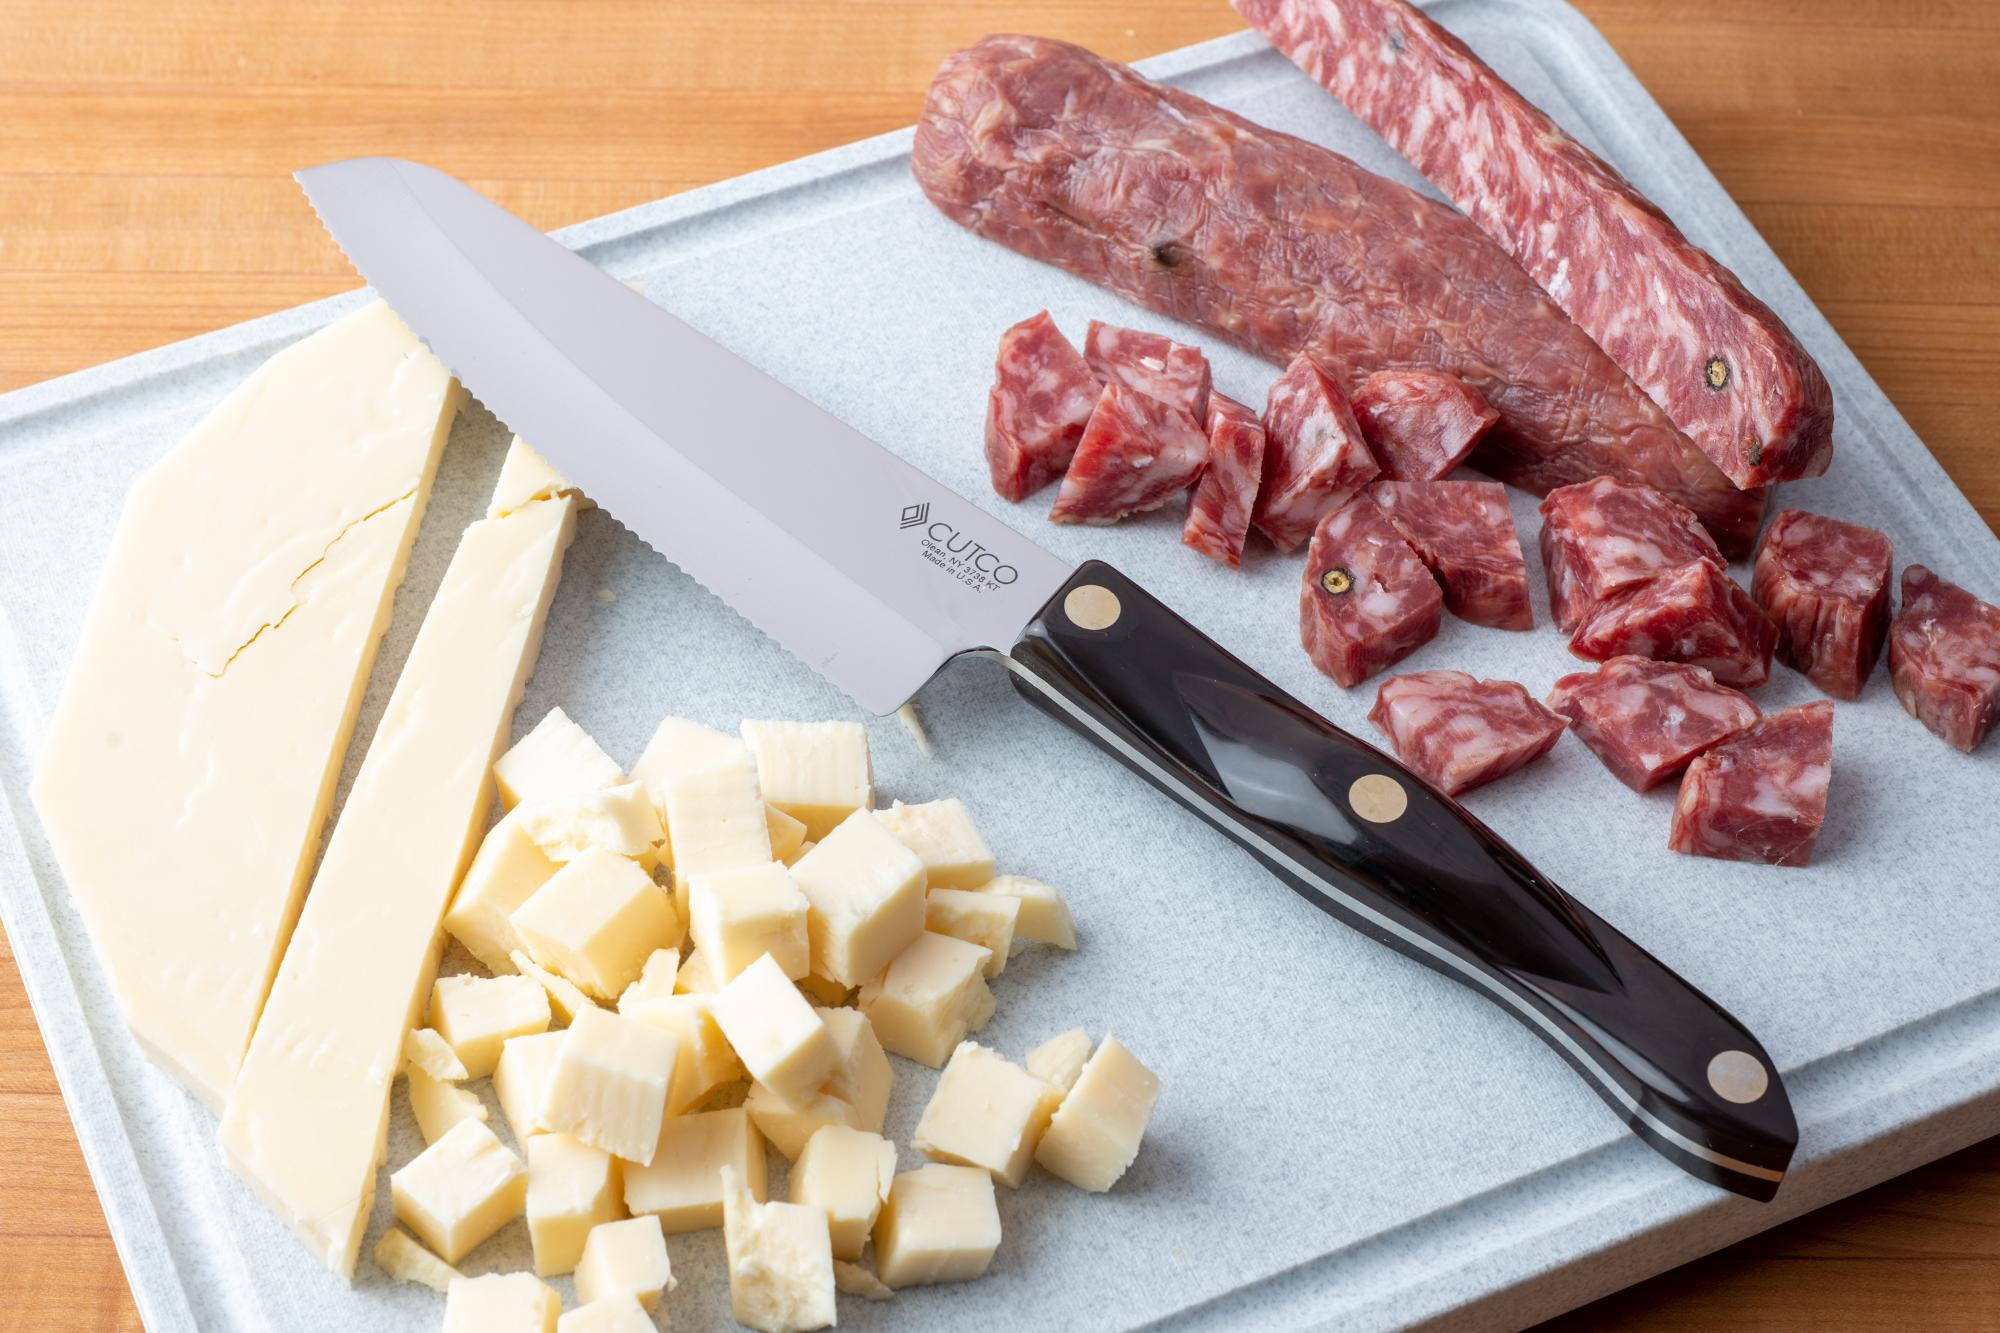 The Hardy Slicer is perfect for cutting up hard meats and cheeses.